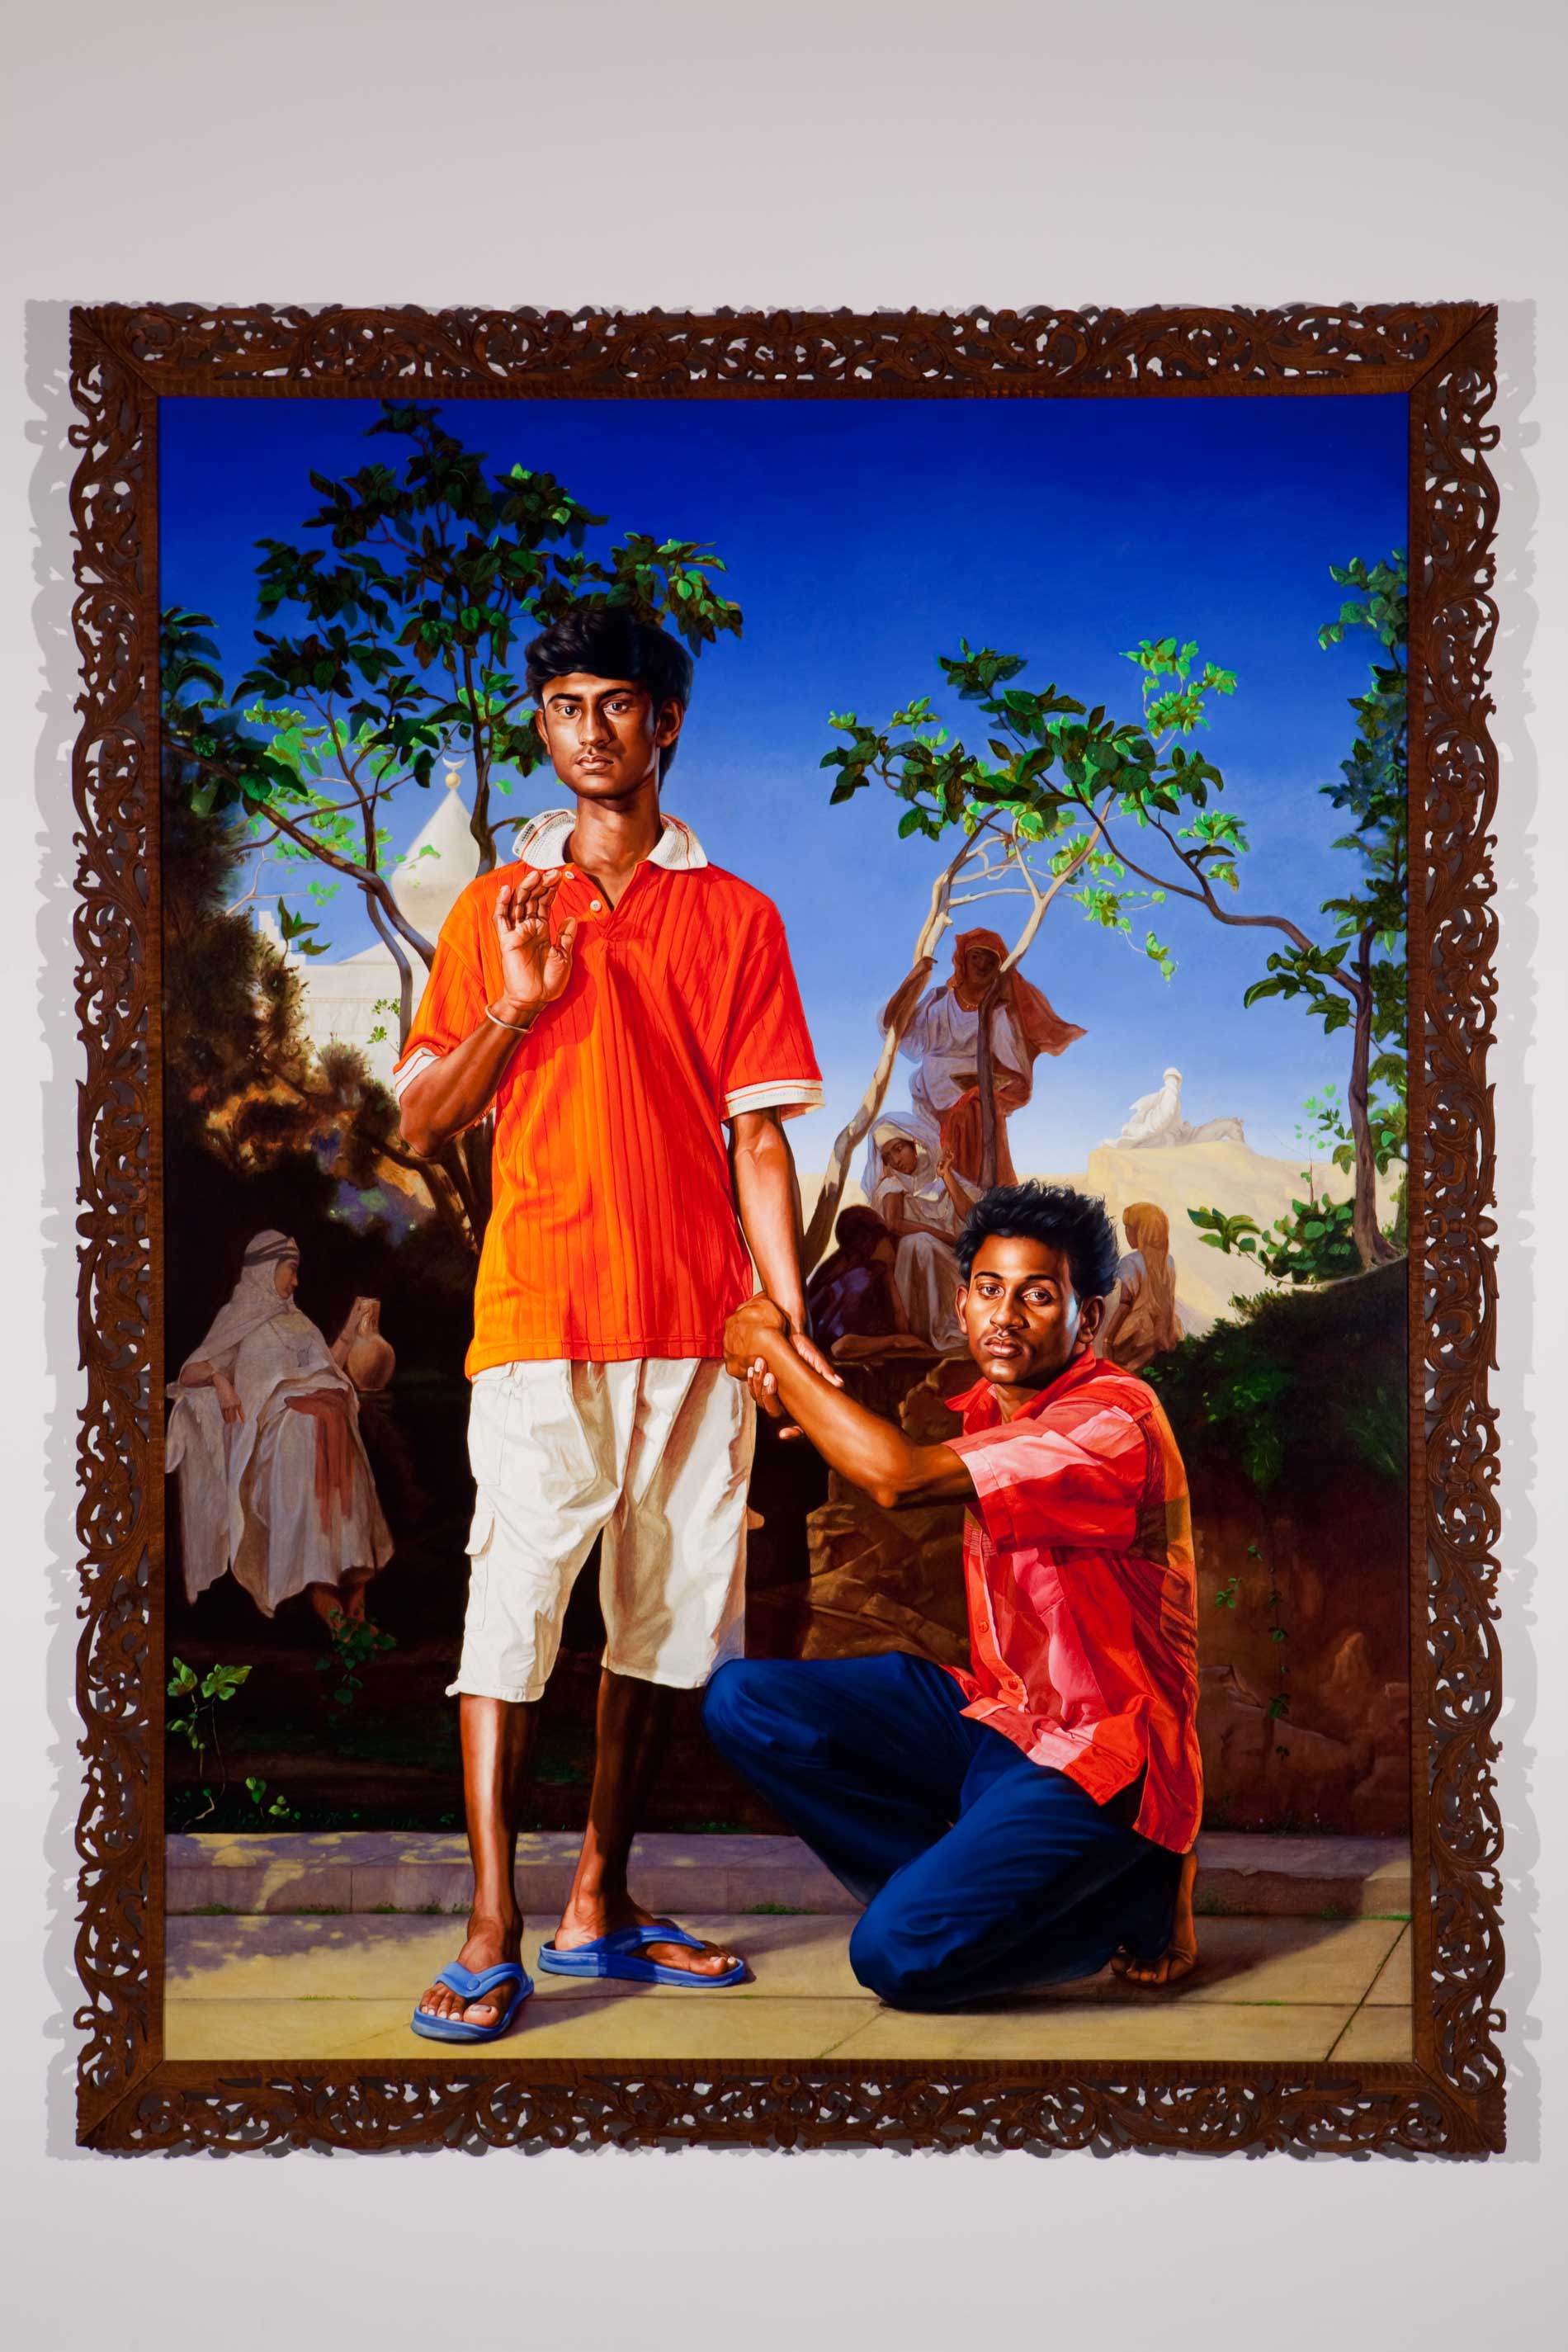 Kehinde Wiley | The World Stage: Sri Lanka | Annoyed Radha with Her Friends, 2010 Oil on Canvas.  | 1